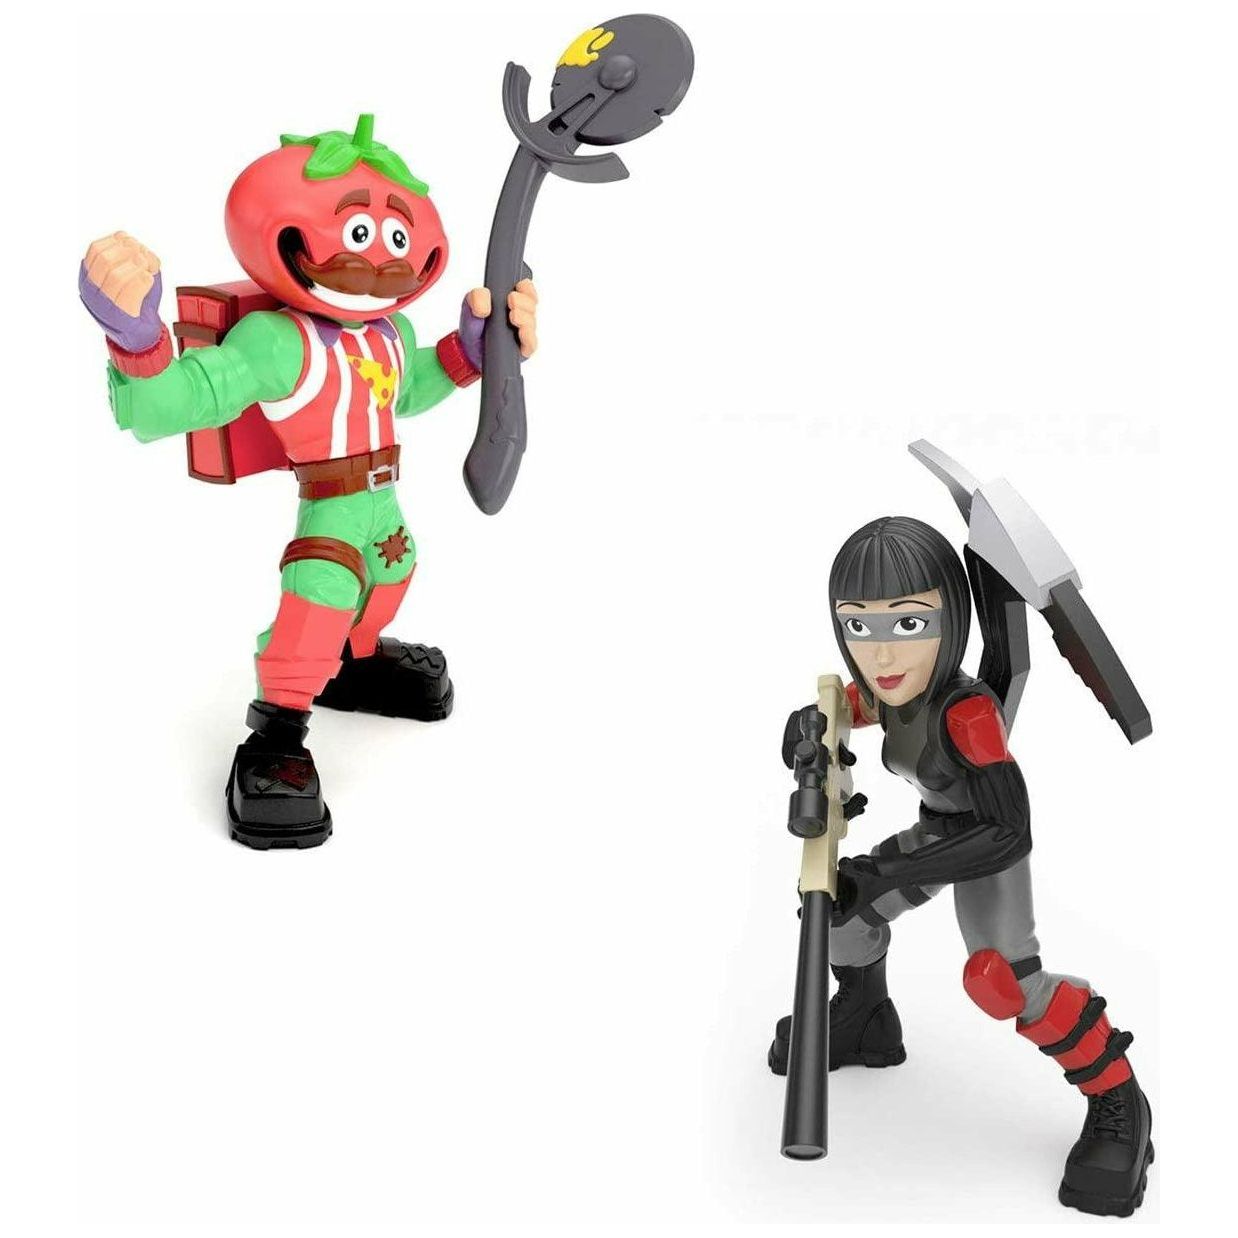 Fortnite Battle Royale Collection: Tomatohead & Shadow Ops - 2 Pack of Action Figures - BumbleToys - 4+ Years, 5-7 Years, Action Battling, Boys, Pre-Order